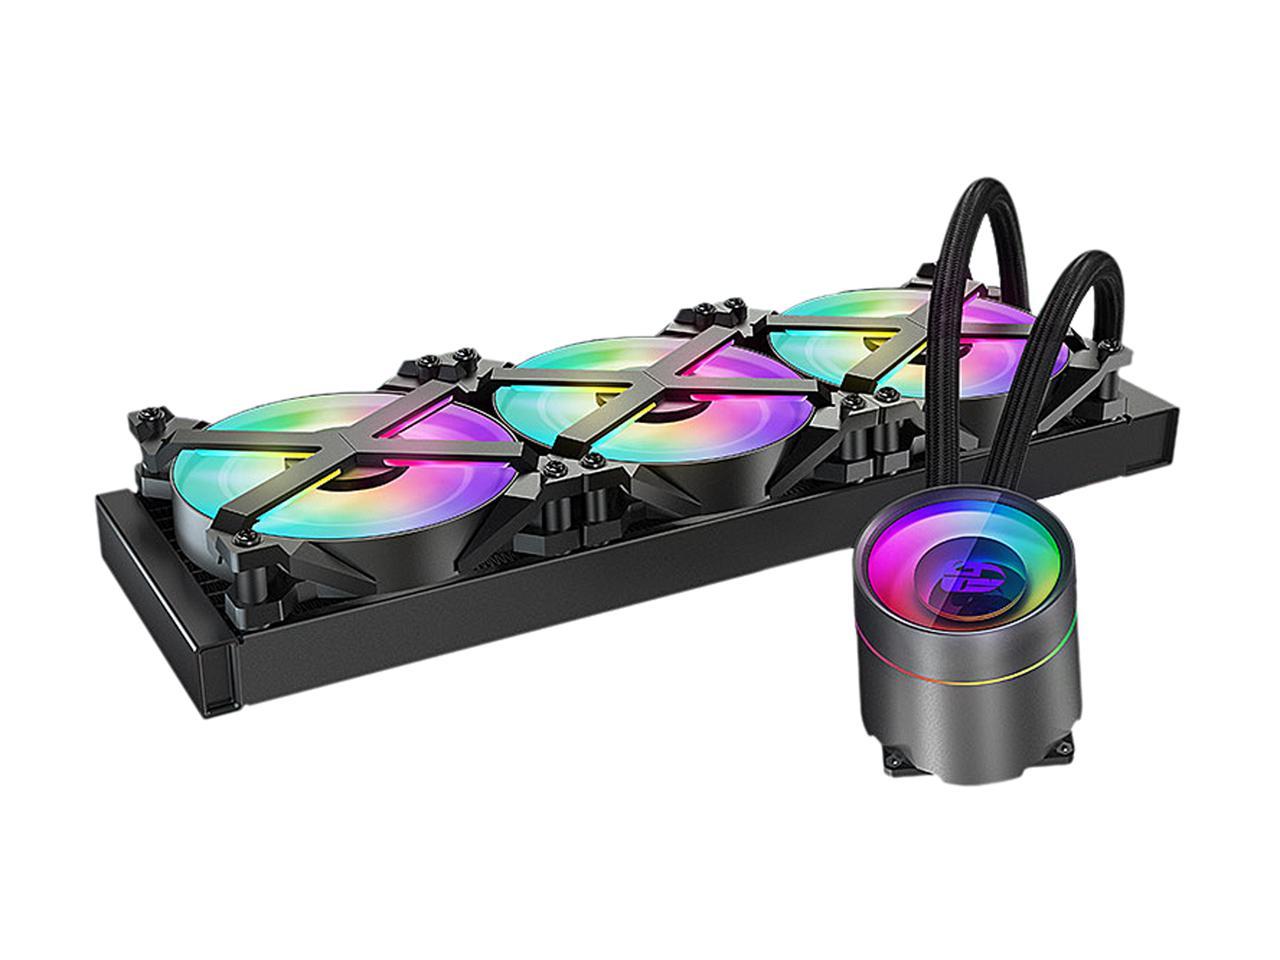 DeepCool CASTLE 360EX RGB AIO Liquid CPU Cooler, Anti-Leak Technology, Three MF120GT A-RGB PWM Fans, Wire Controller and 5V-D-G 3-Pin Motherboard Connector, TR4/AM4 Supported